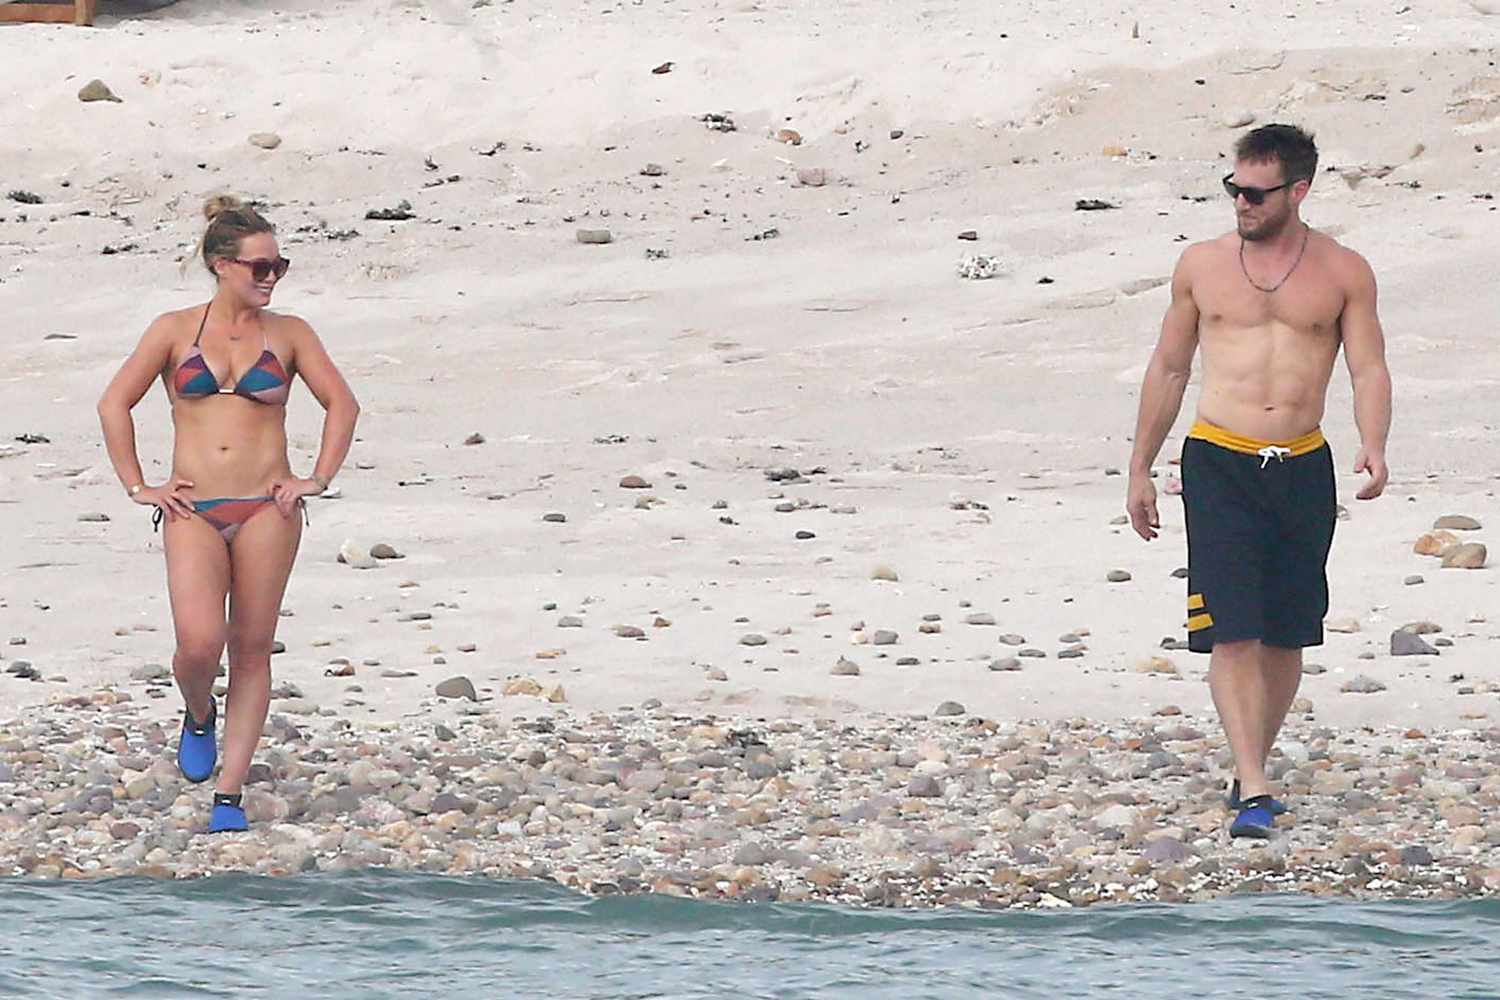 Exclusive... Premium: Hilary Duff And Jason Walsh Hang Out At The Beach In Puerto Vallarta ***NO INTERNET W/O PRIOR AGREEMENT***